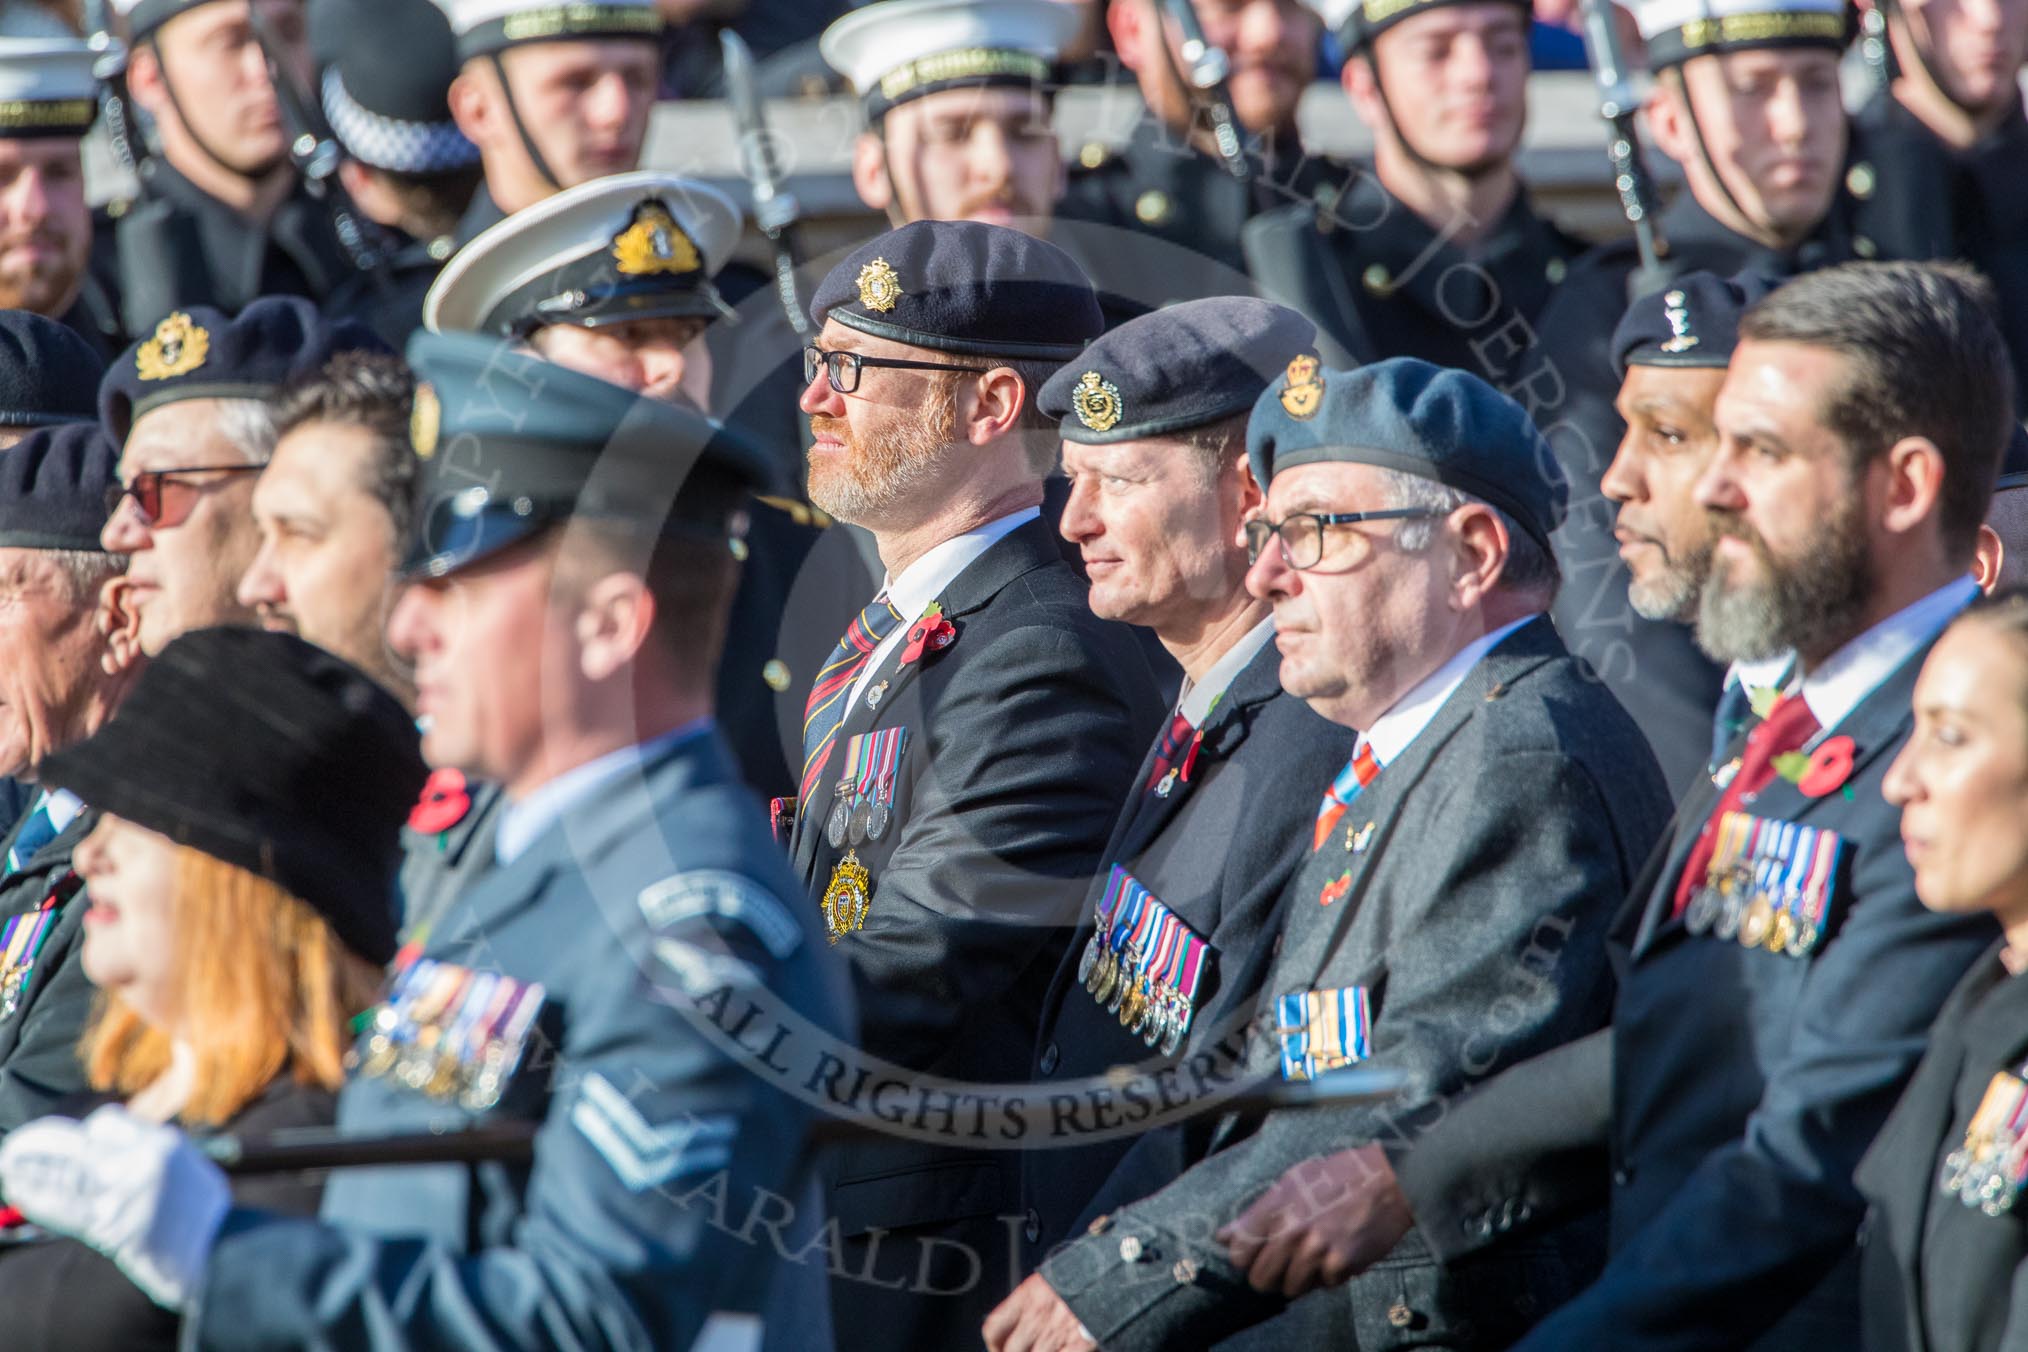 Combat Stress (Group AA6, 36 members) during the Royal British Legion March Past on Remembrance Sunday at the Cenotaph, Whitehall, Westminster, London, 11 November 2018, 11:49.